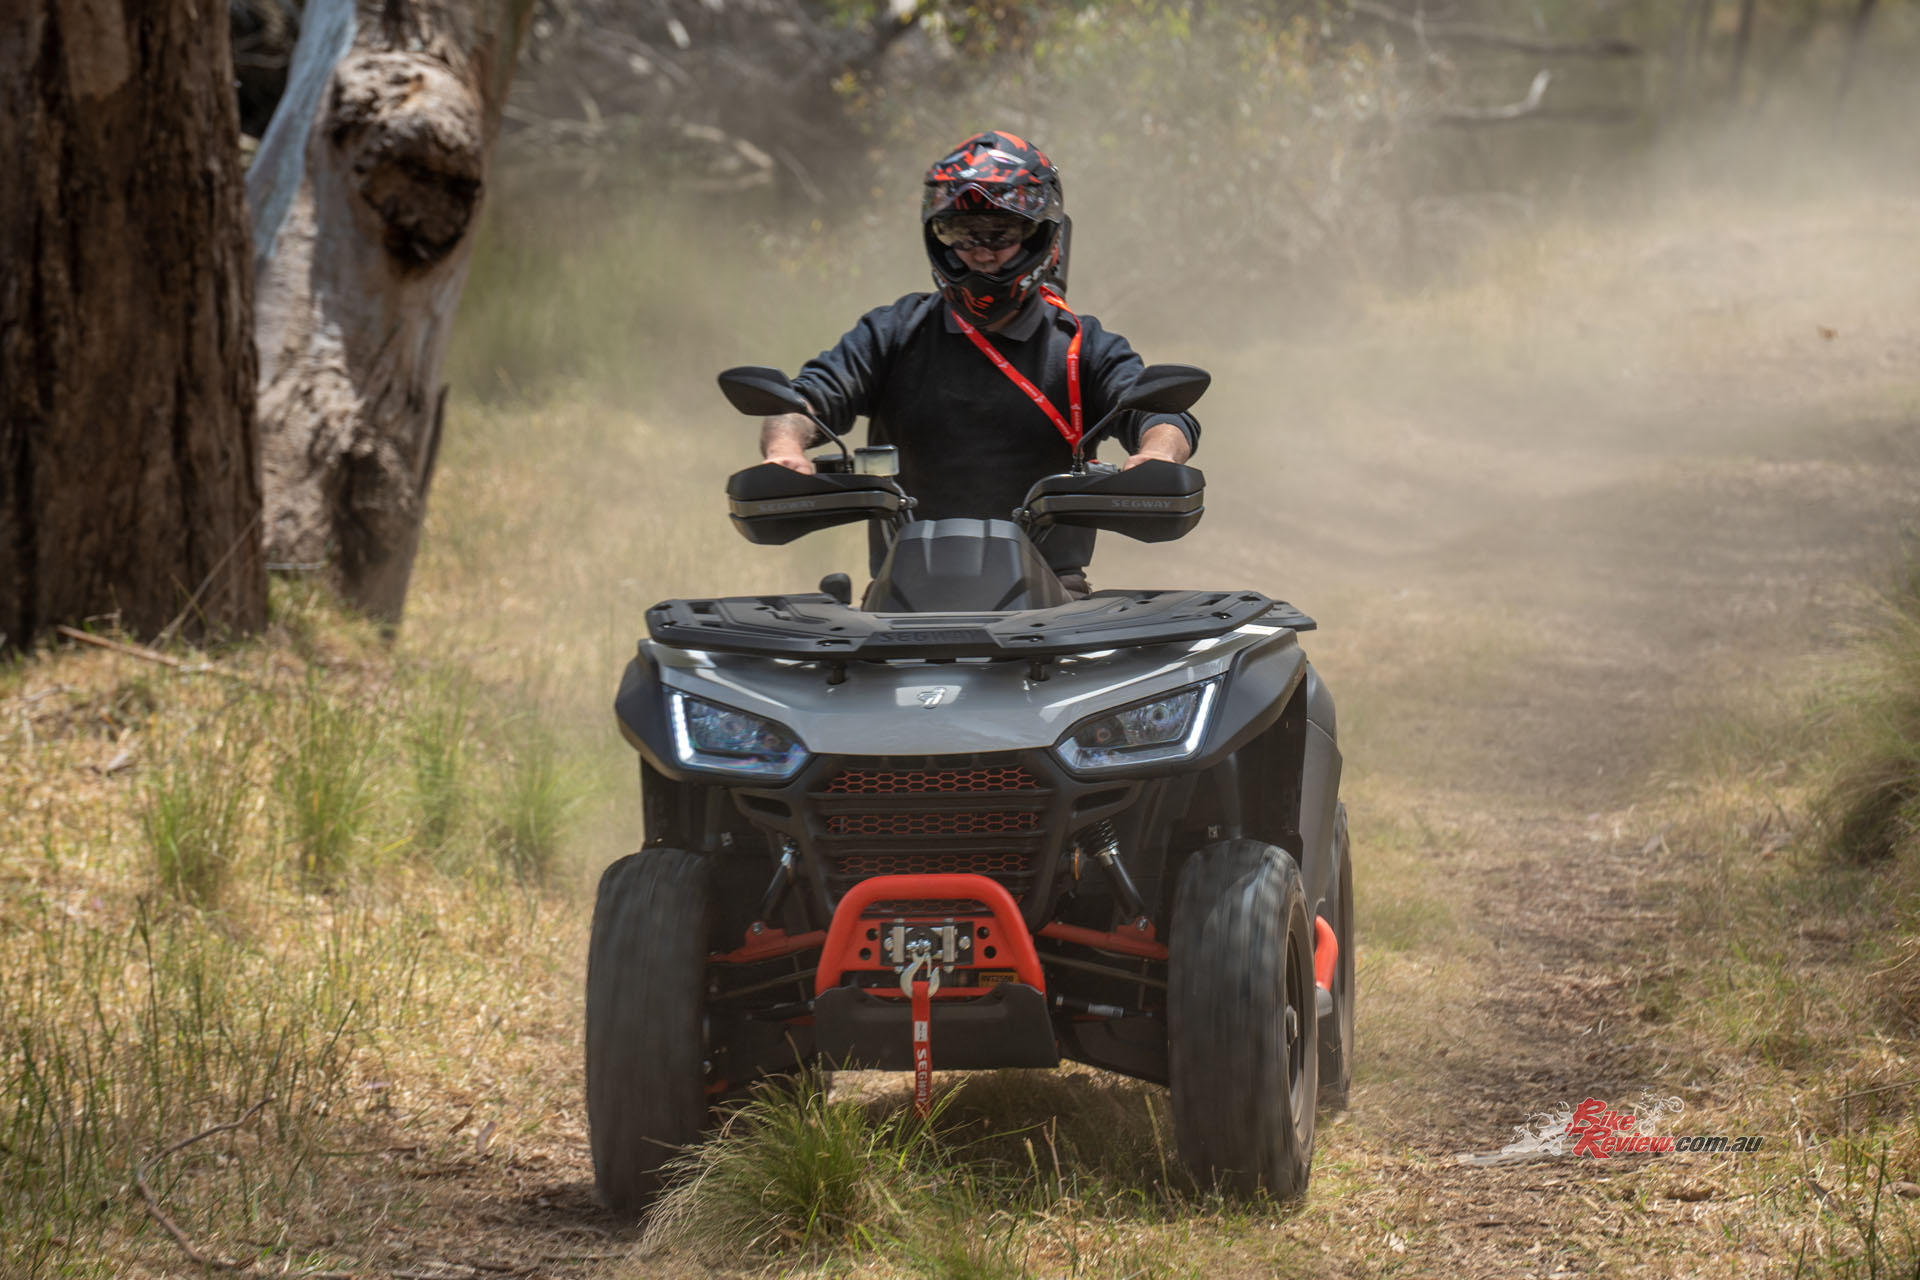 The AT6 comes with a bar mounted easy to use wheel locking system that allows you to change between open or locked 2WD and 4WD drive with a click of a button to pair with an indicator on the display.